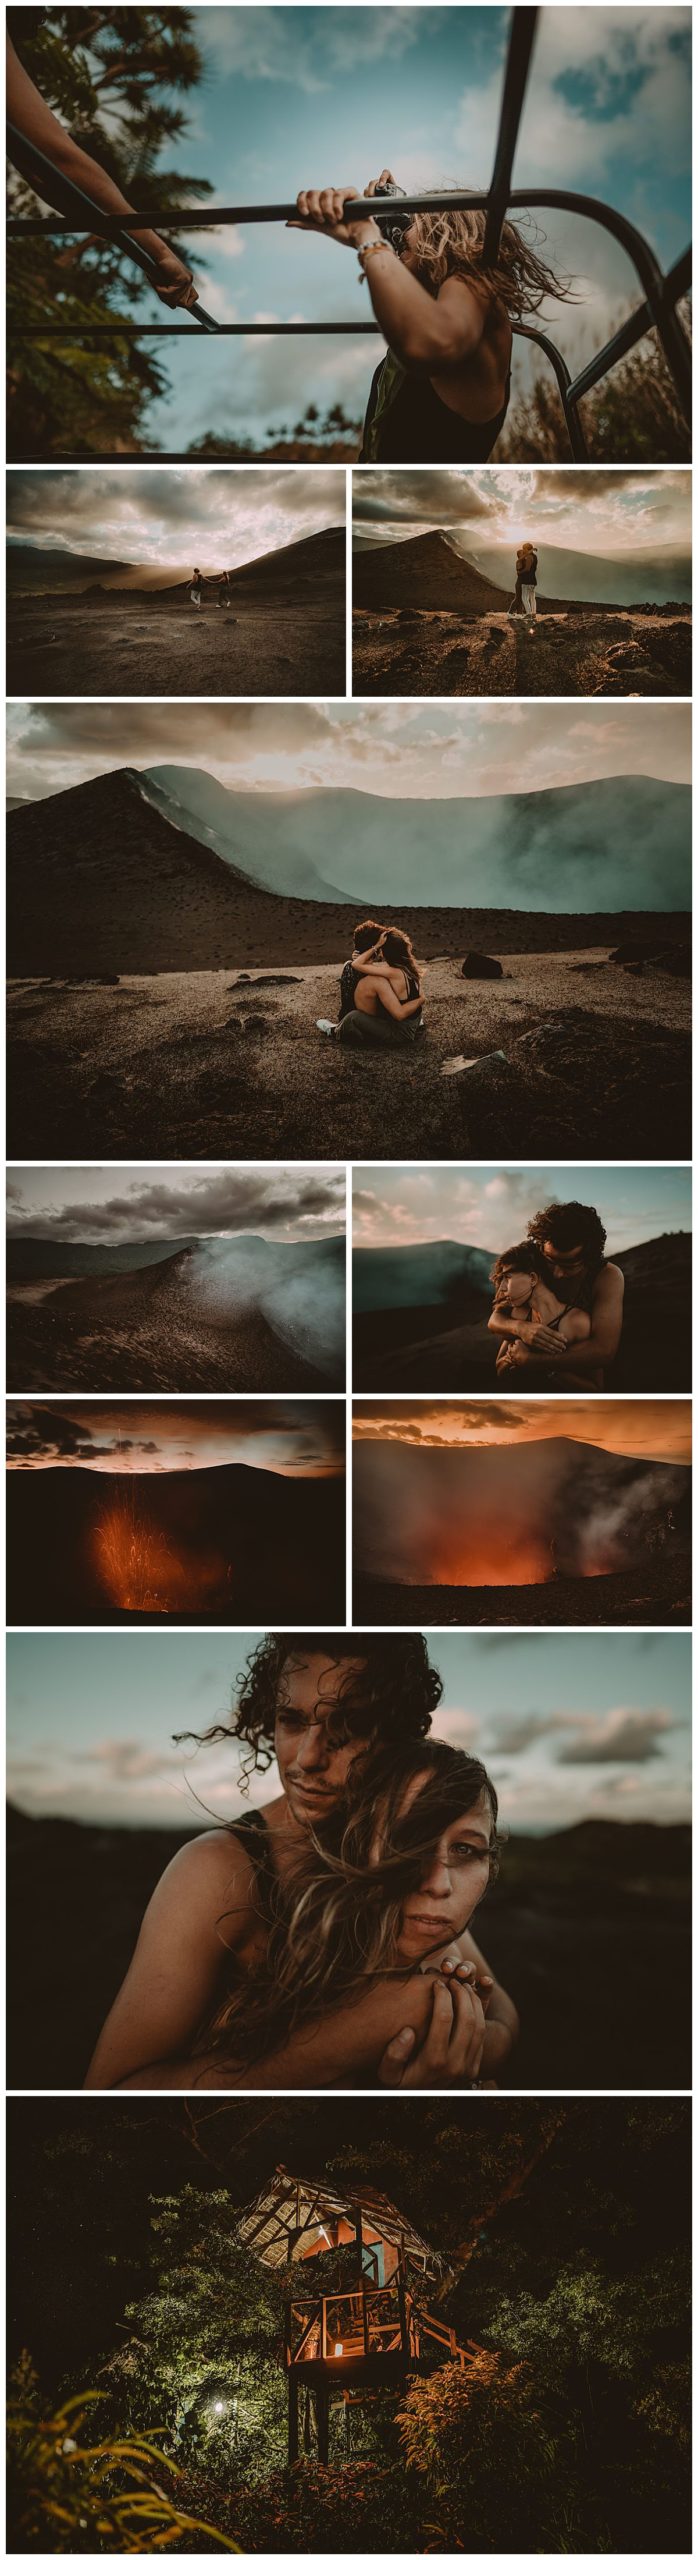 Images of the ash plain and the volcano on the island of Tanna in Vanuatu taken during a couple's holiday.